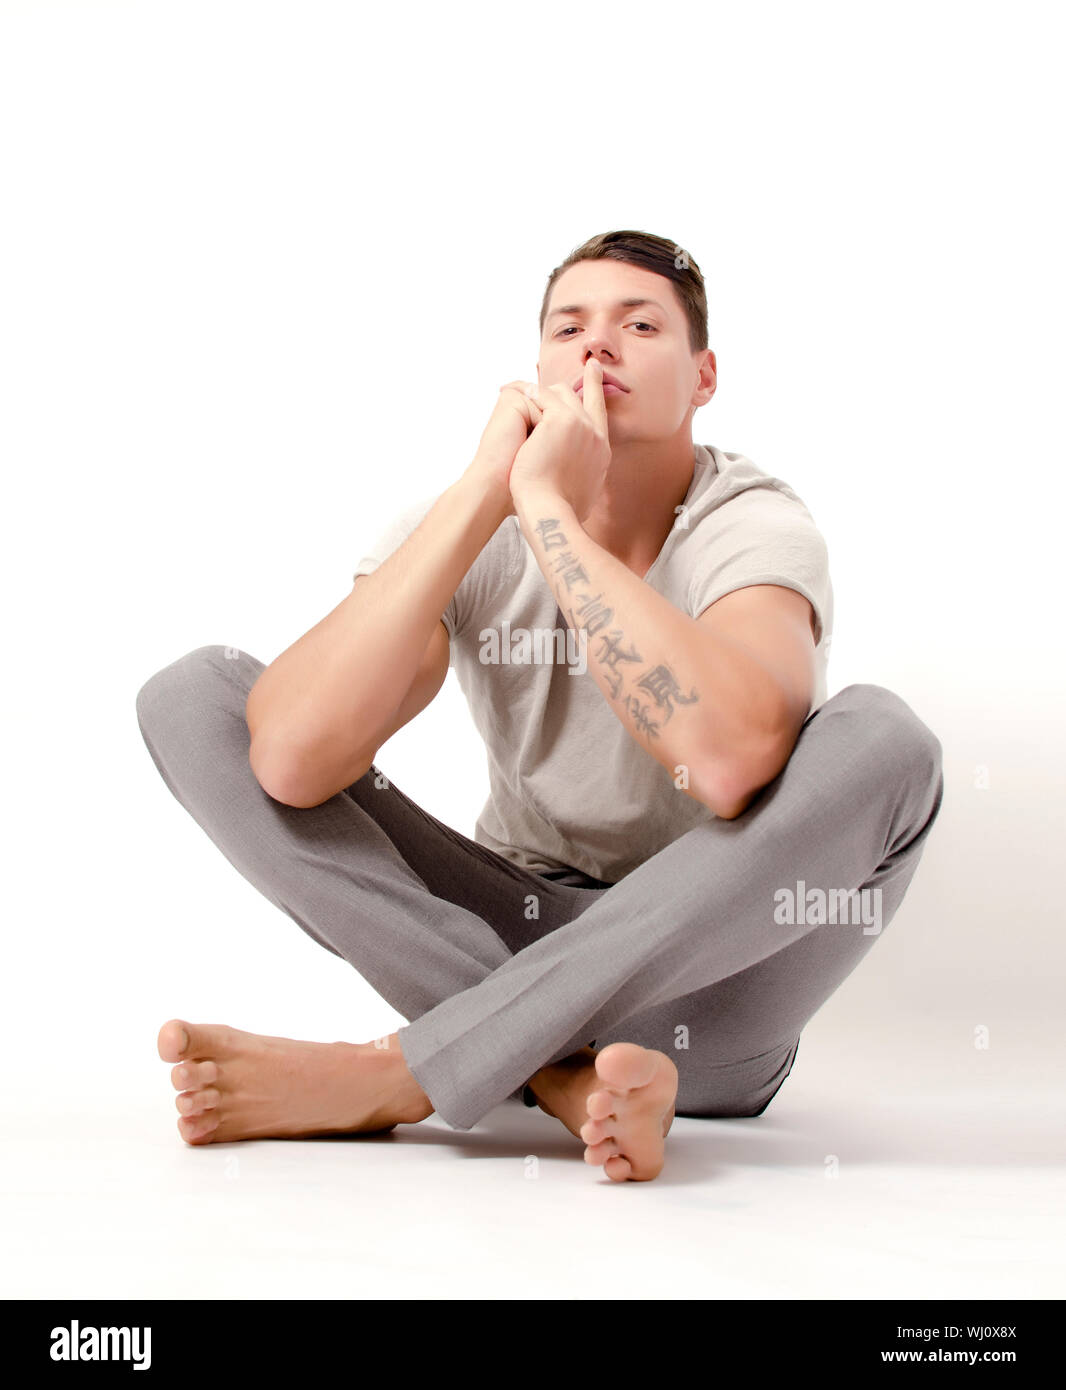 Man sitting and pointing a finger on his mouth Stock Photo